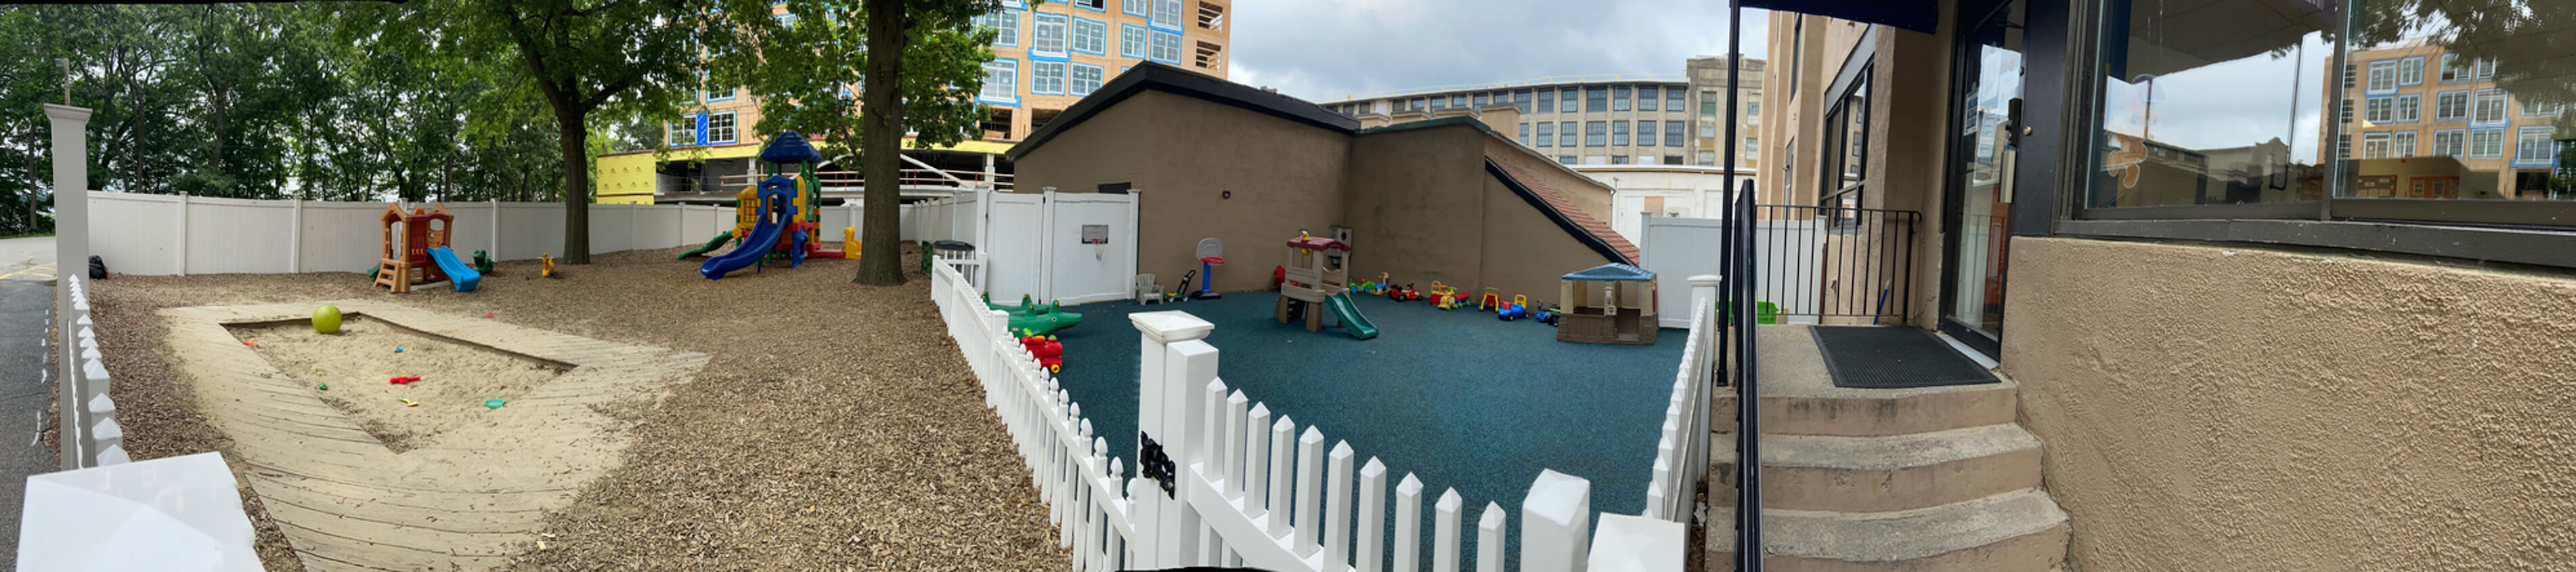 Exterior area of The Teddy Bear Village child care center